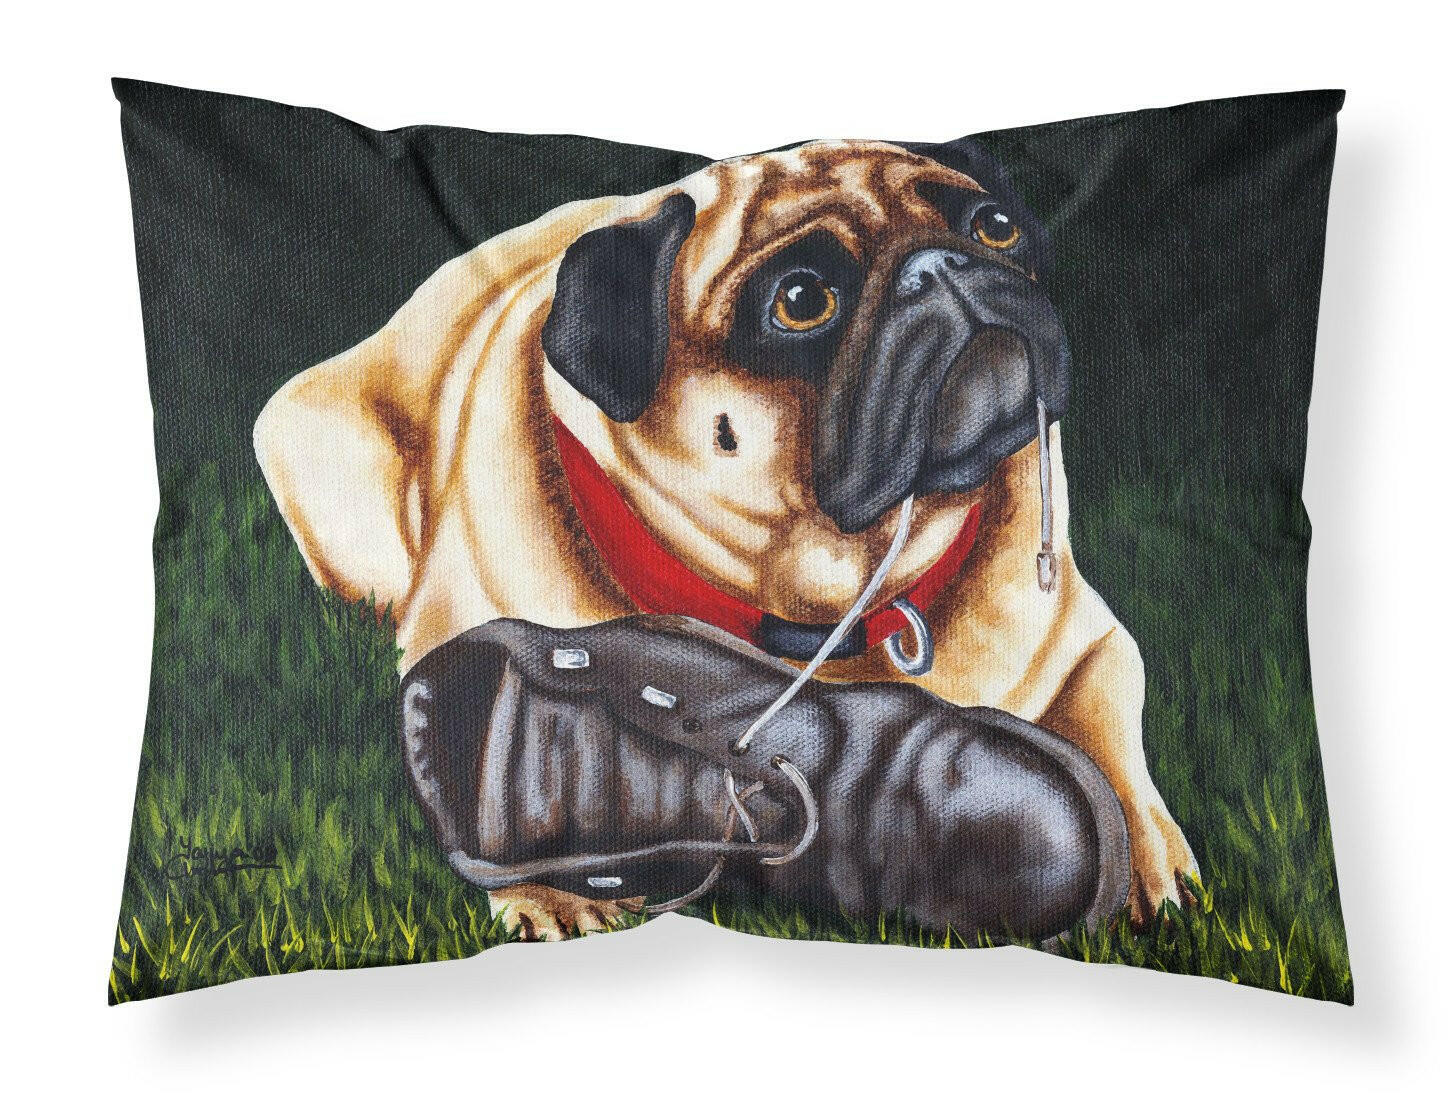 Cluster Buster the Pug Fabric Standard Pillowcase AMB1382PILLOWCASE by Caroline's Treasures